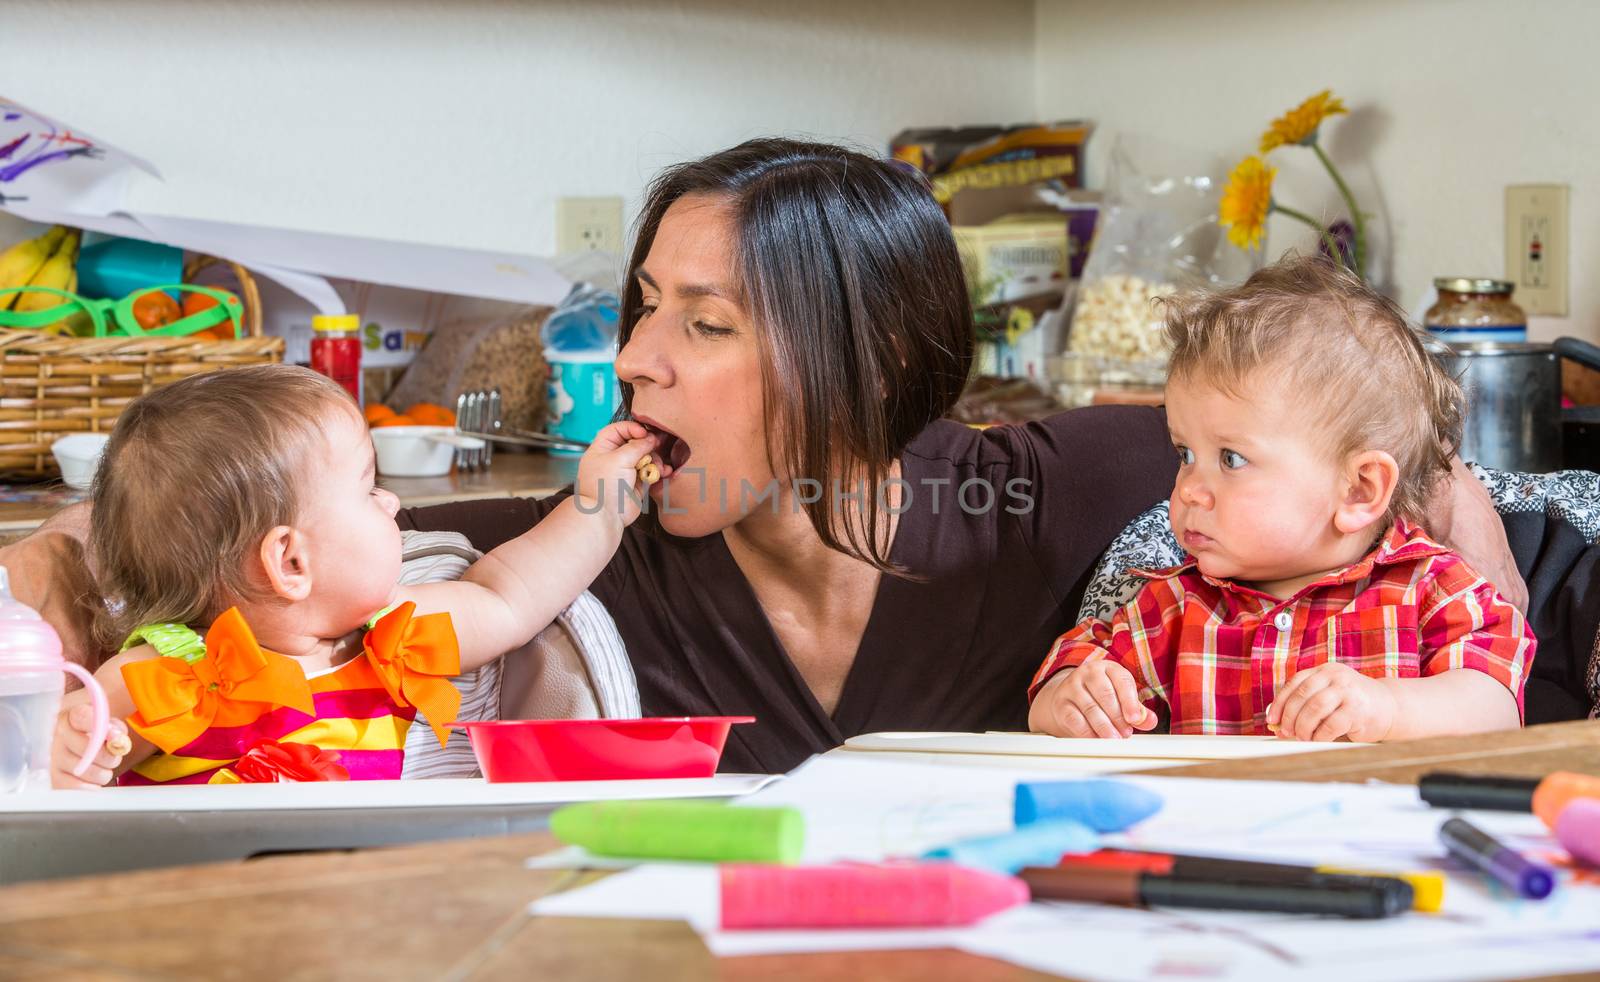 A Baby feeds her mother at breakfast